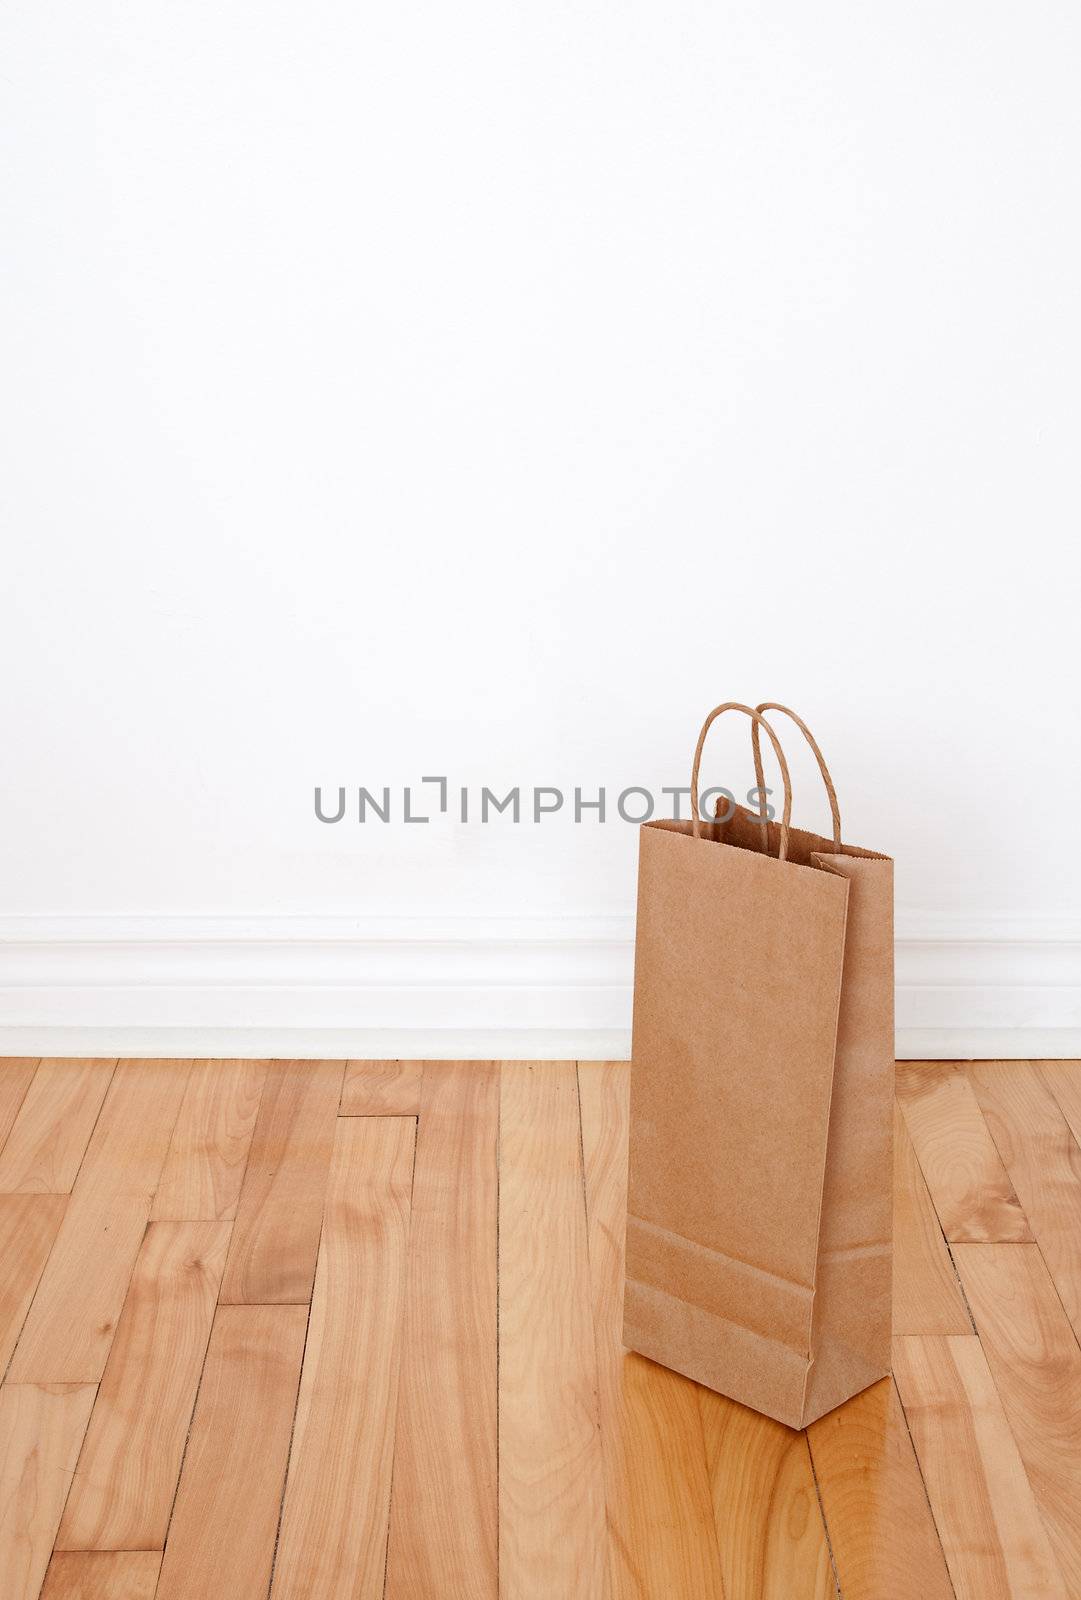 Paper bag on wooden floor against the white wall.